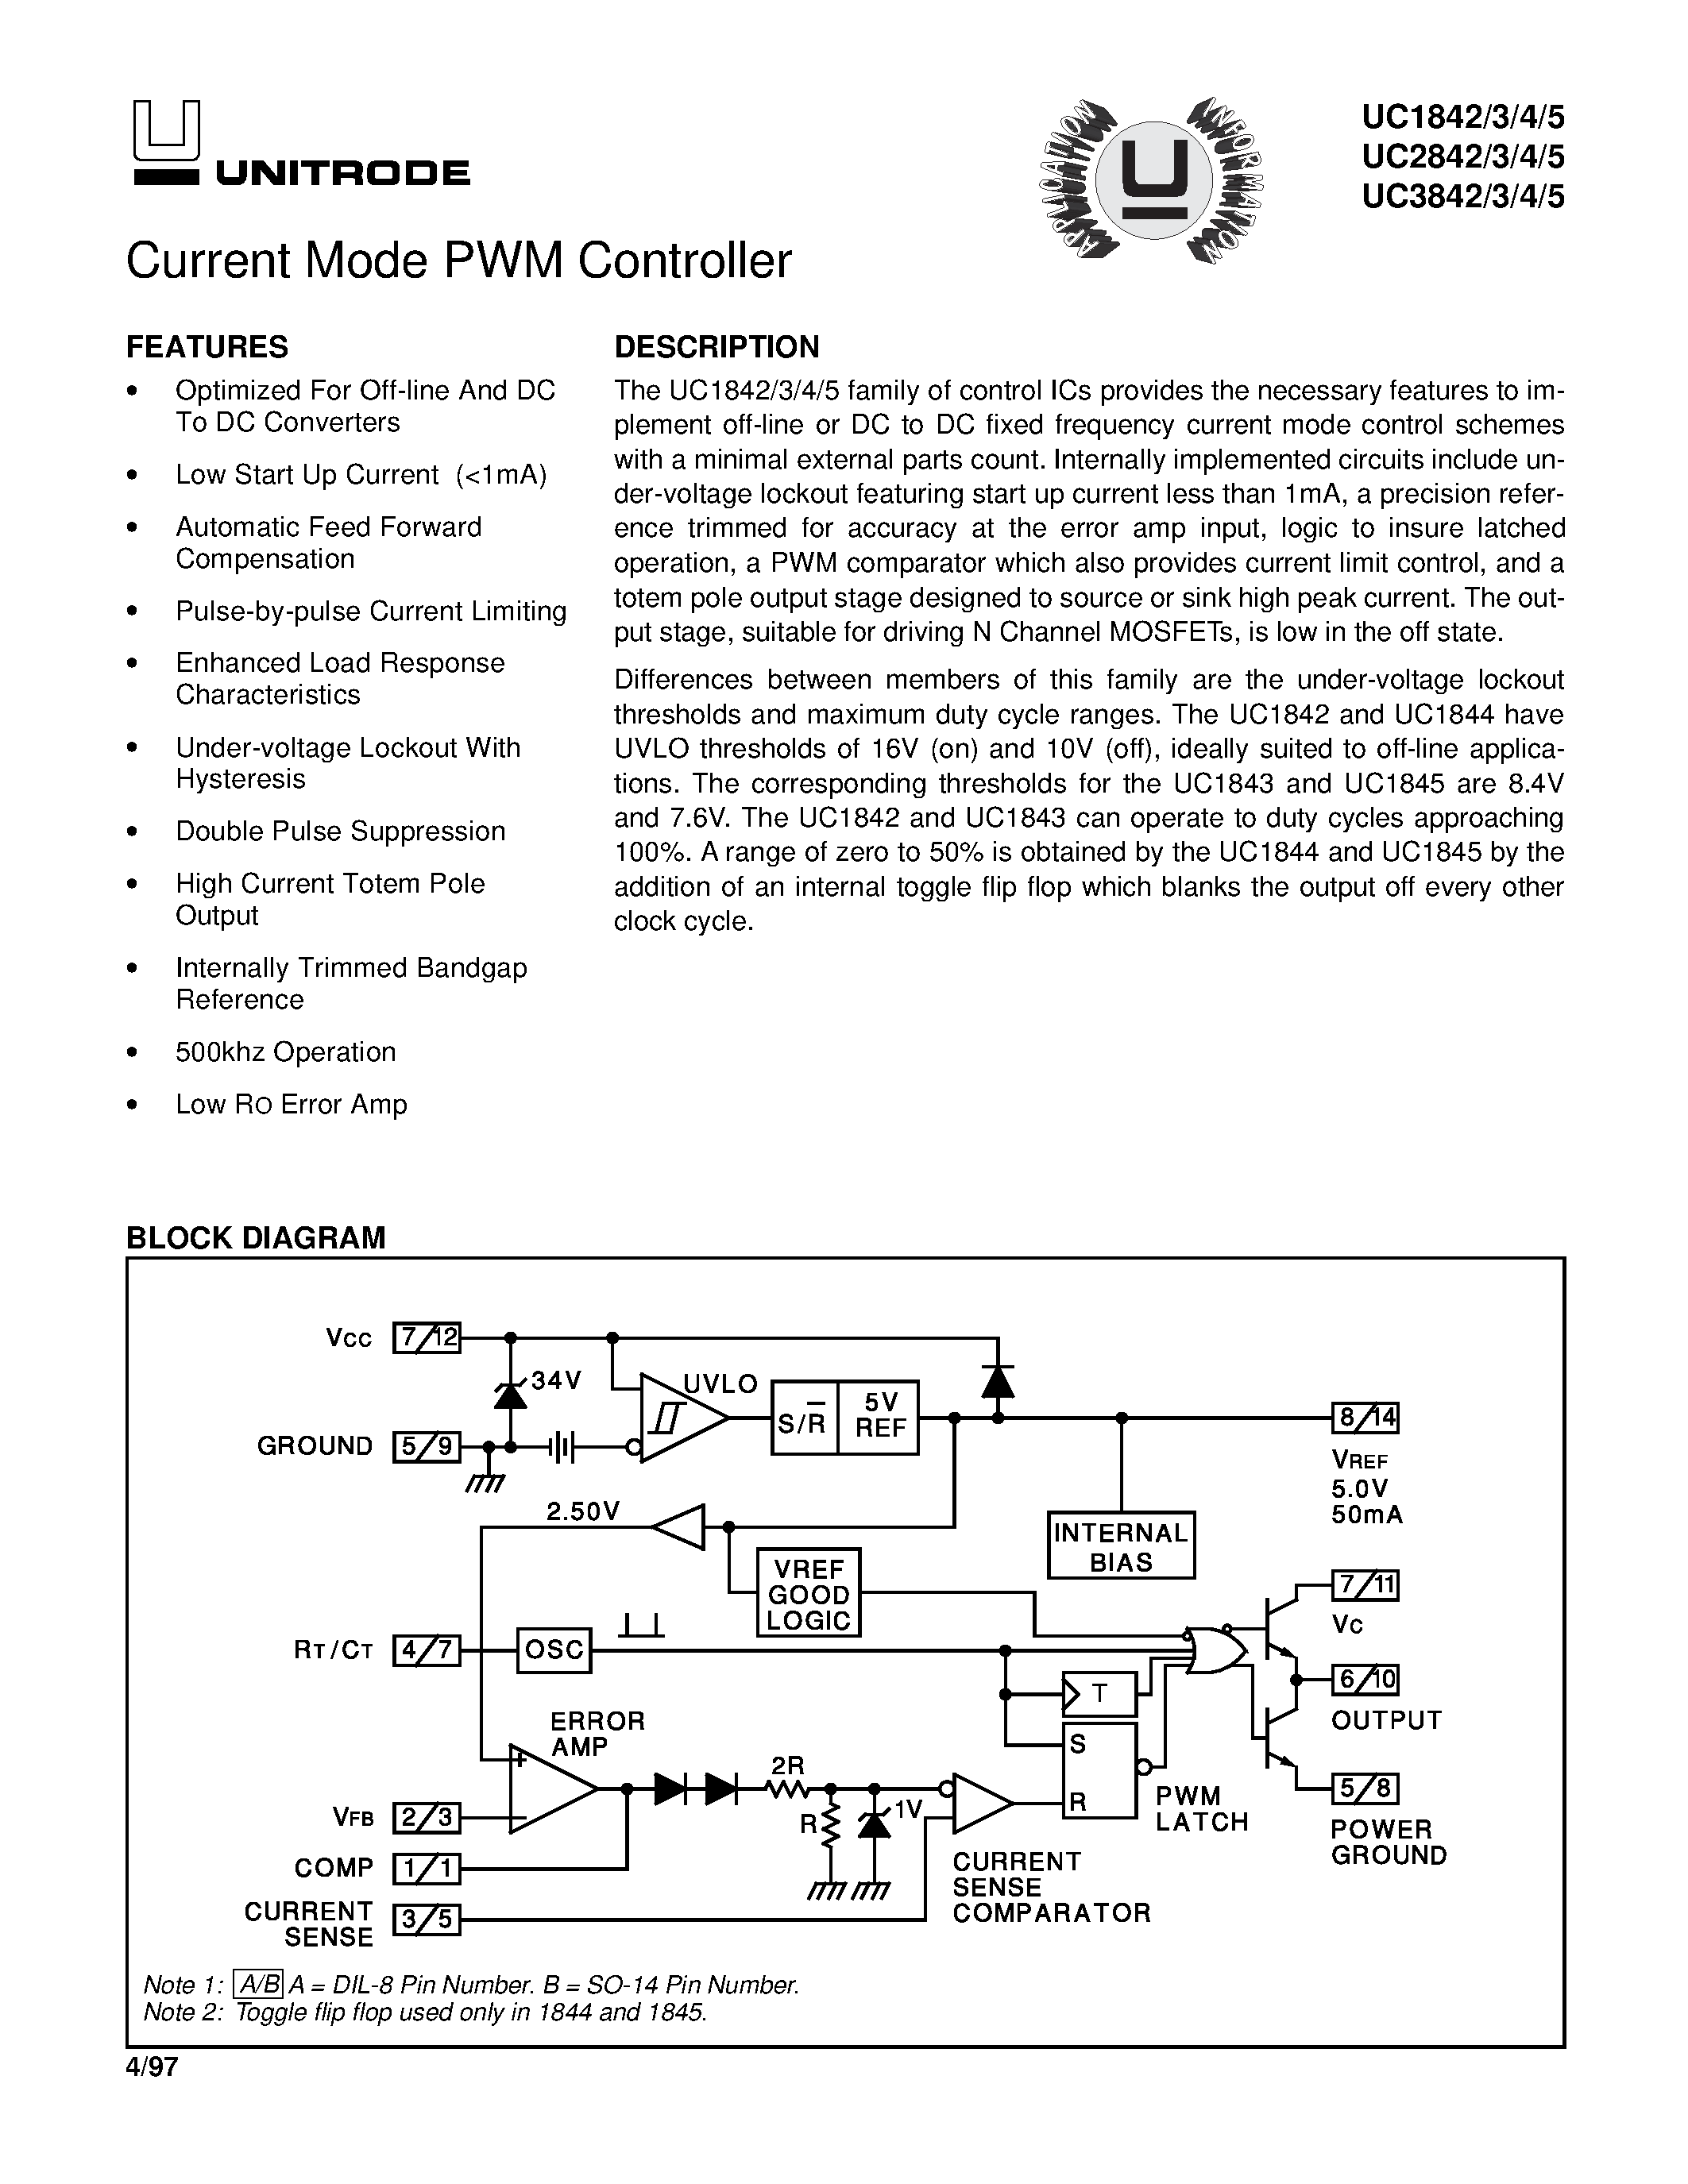 Datasheet UC2844 - Current Mode PWM Controller page 1